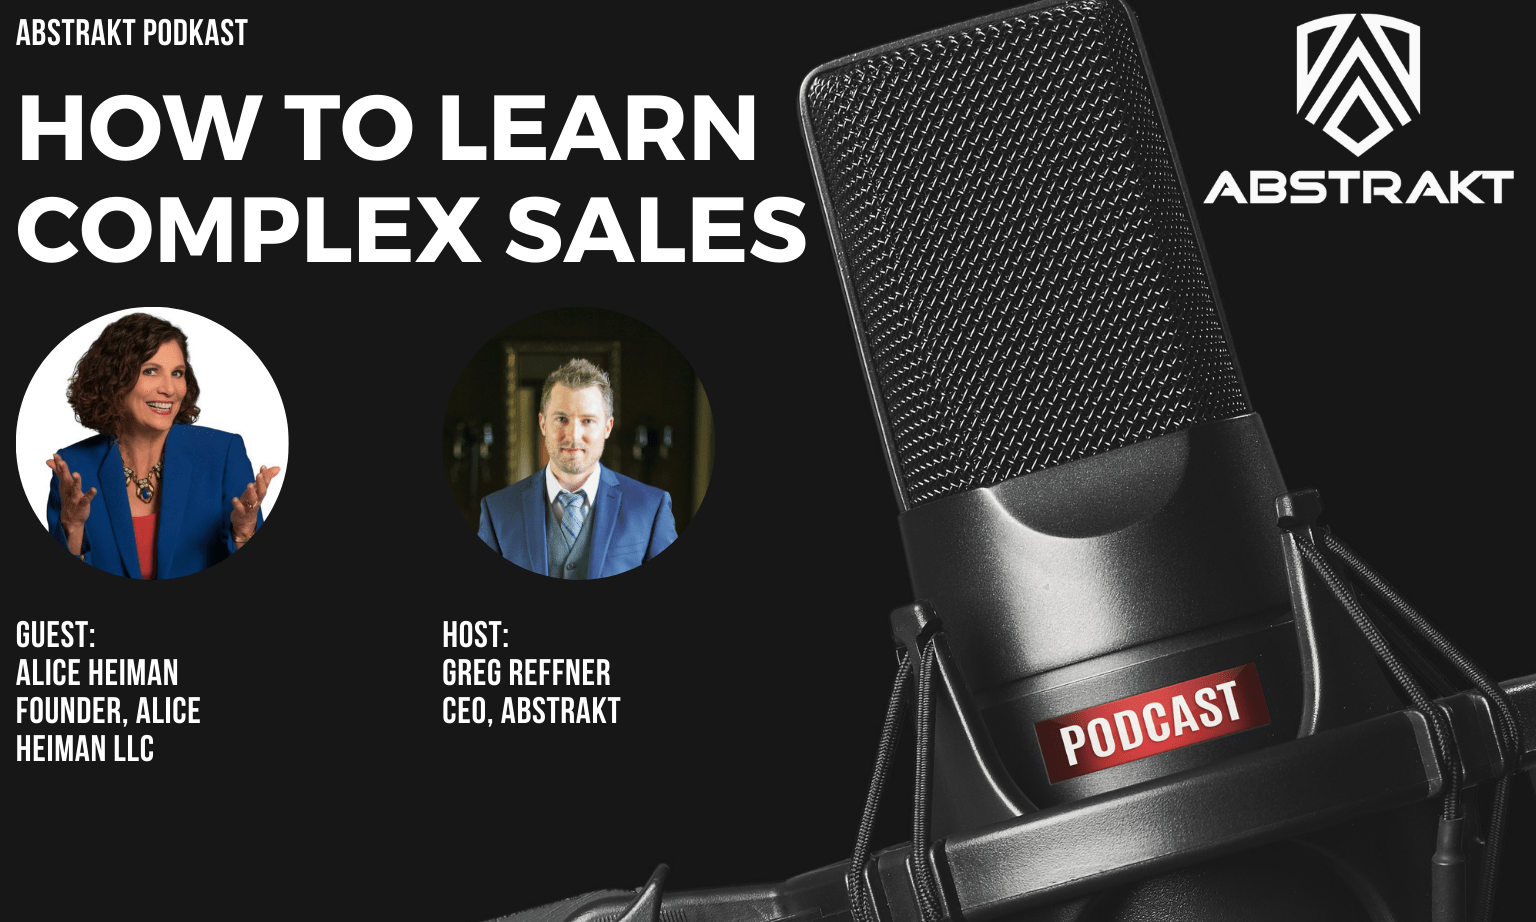 How to Teach Reps to Manage Complex Sales While Remote